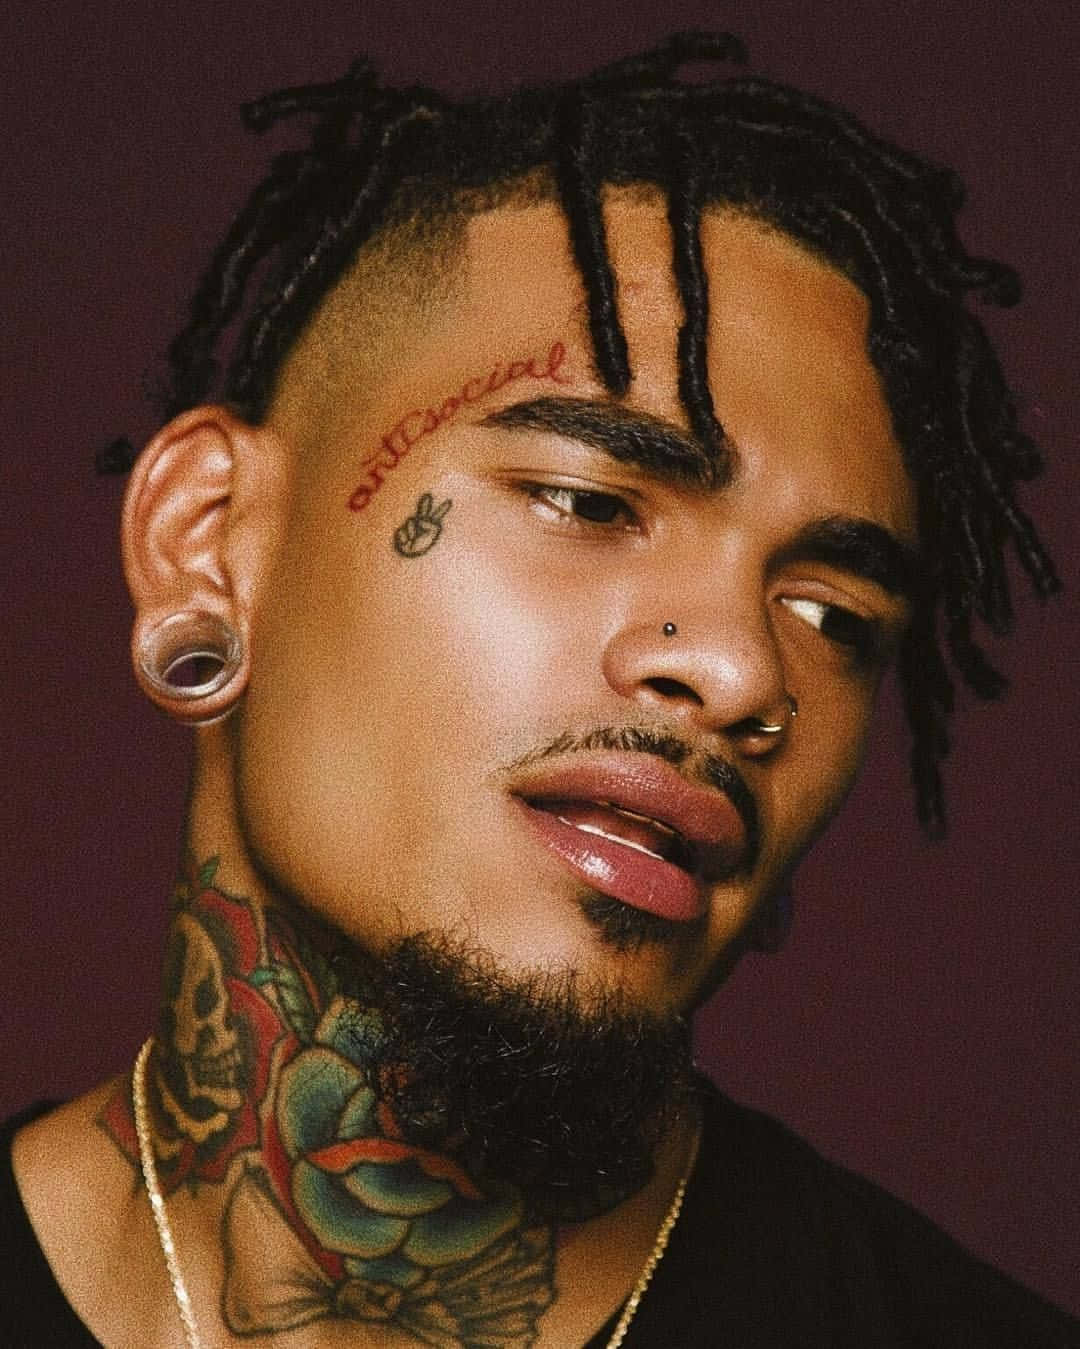 A Man With Tattoos On His Neck